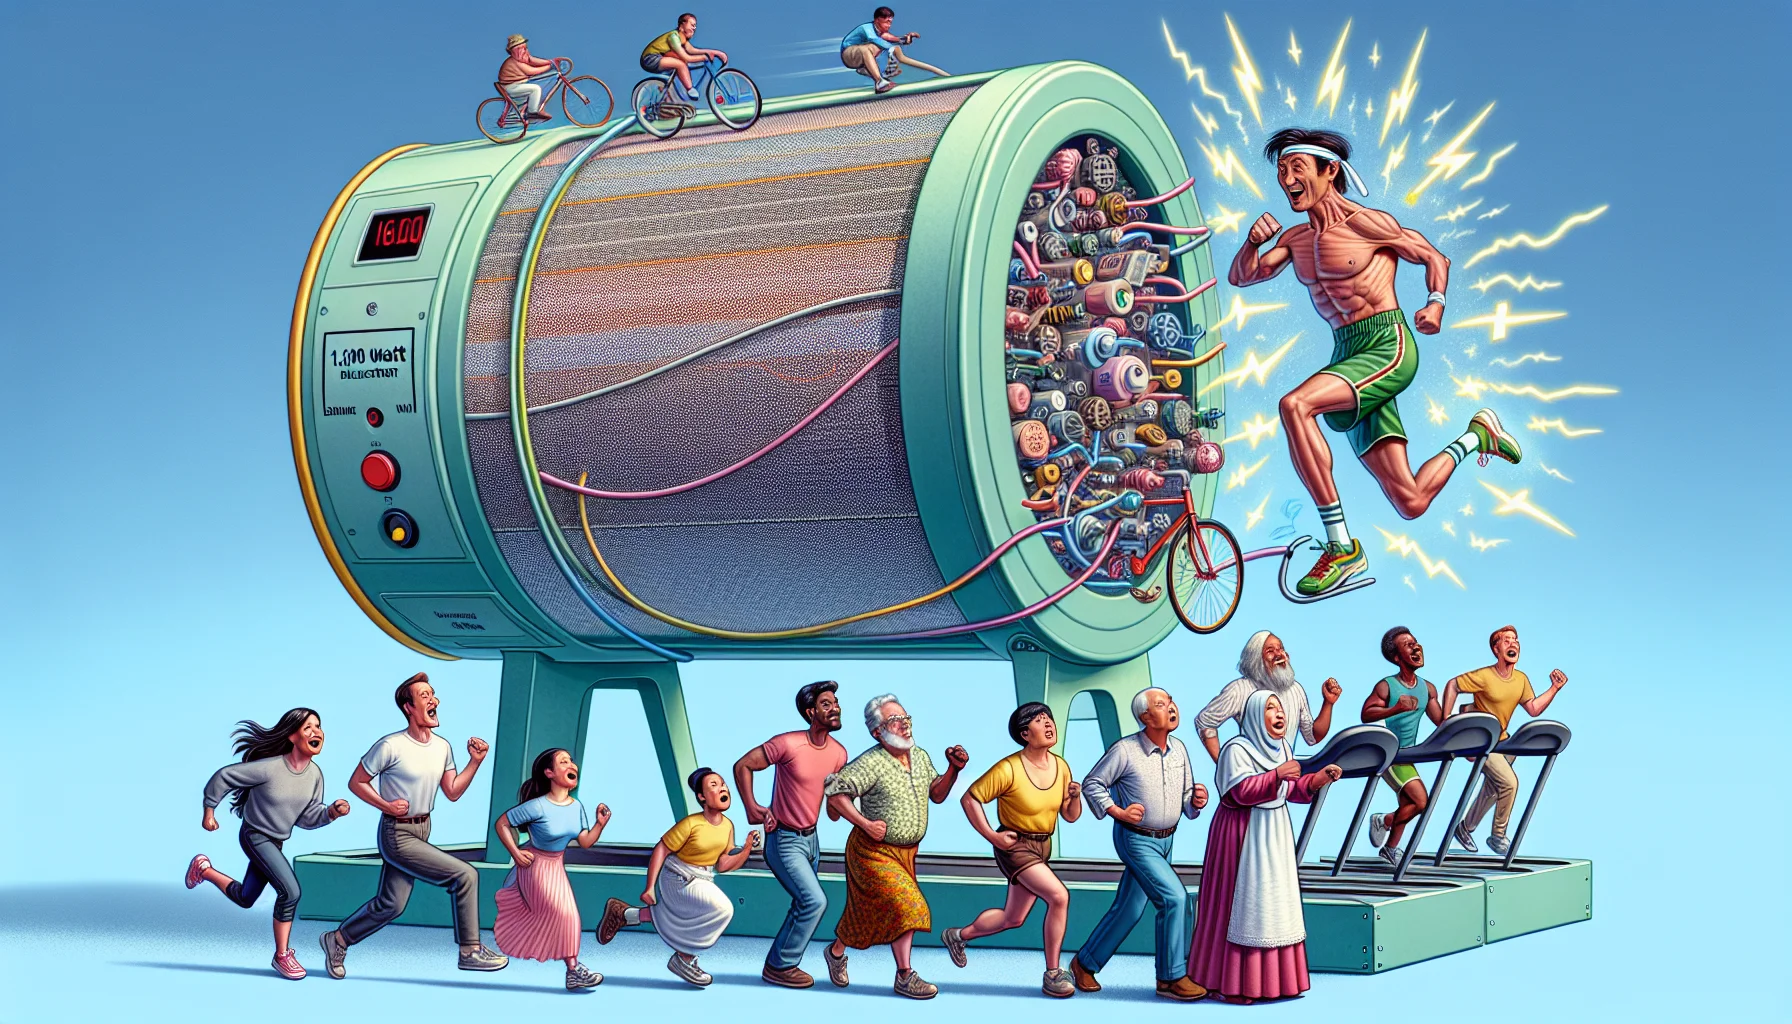 Imagine a 13,000 Watt electrical filter lodged in a hilarious circumstance. Perhaps it's engaging in a bicycle race with electrical gadgets, powered by its own energy and taking the lead. Or consider a human-sized filter on a treadmill, flexing its 'muscles' and generating sparks of electricity, while a group of diverse people, such as a Caucasian woman, a Hispanic man, a South Asian elderly woman, and a Middle-Eastern young boy, look on in amazement and laughter. The overall vibe should be playful and whimsical, elegantly nudging the viewer to reflect on alternate exciting ways of generating electricity.